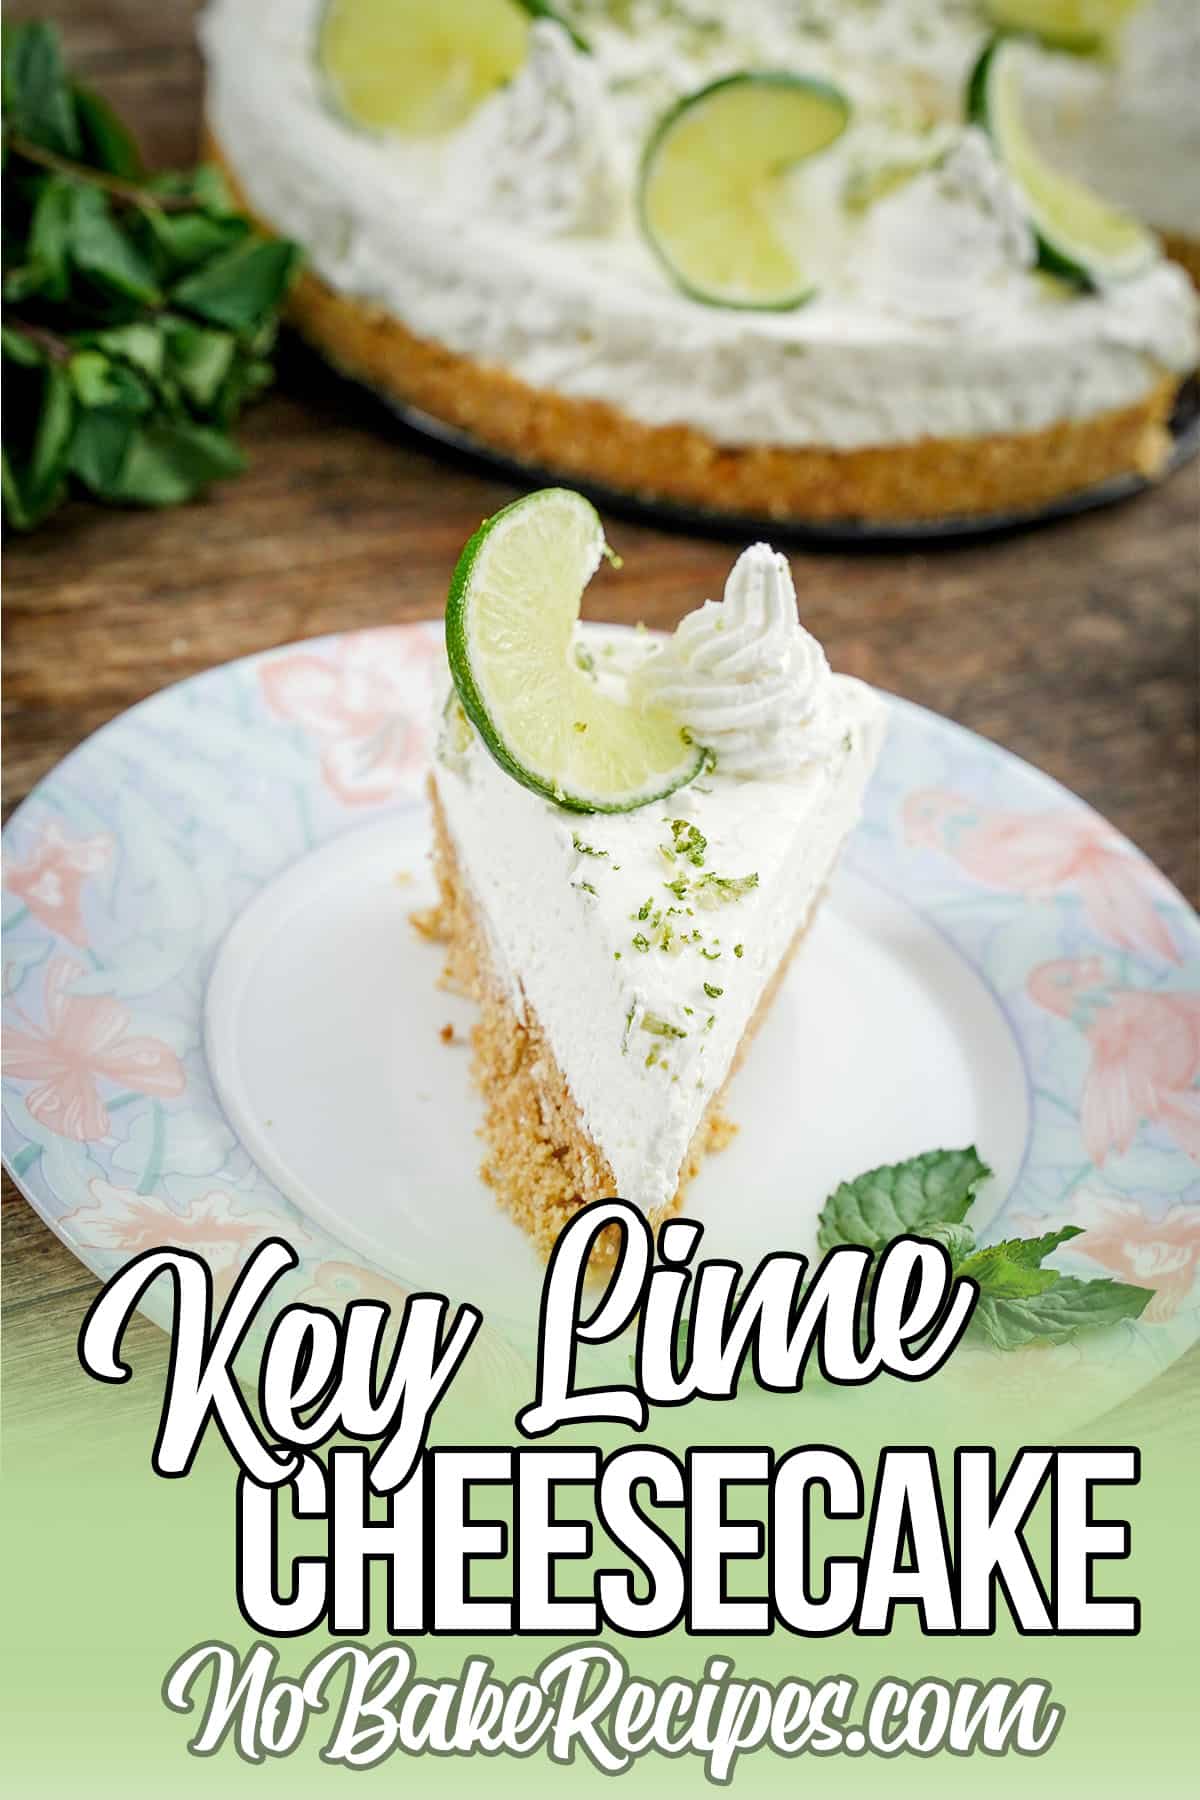 Share this delicious Key Lime Cheesecake.